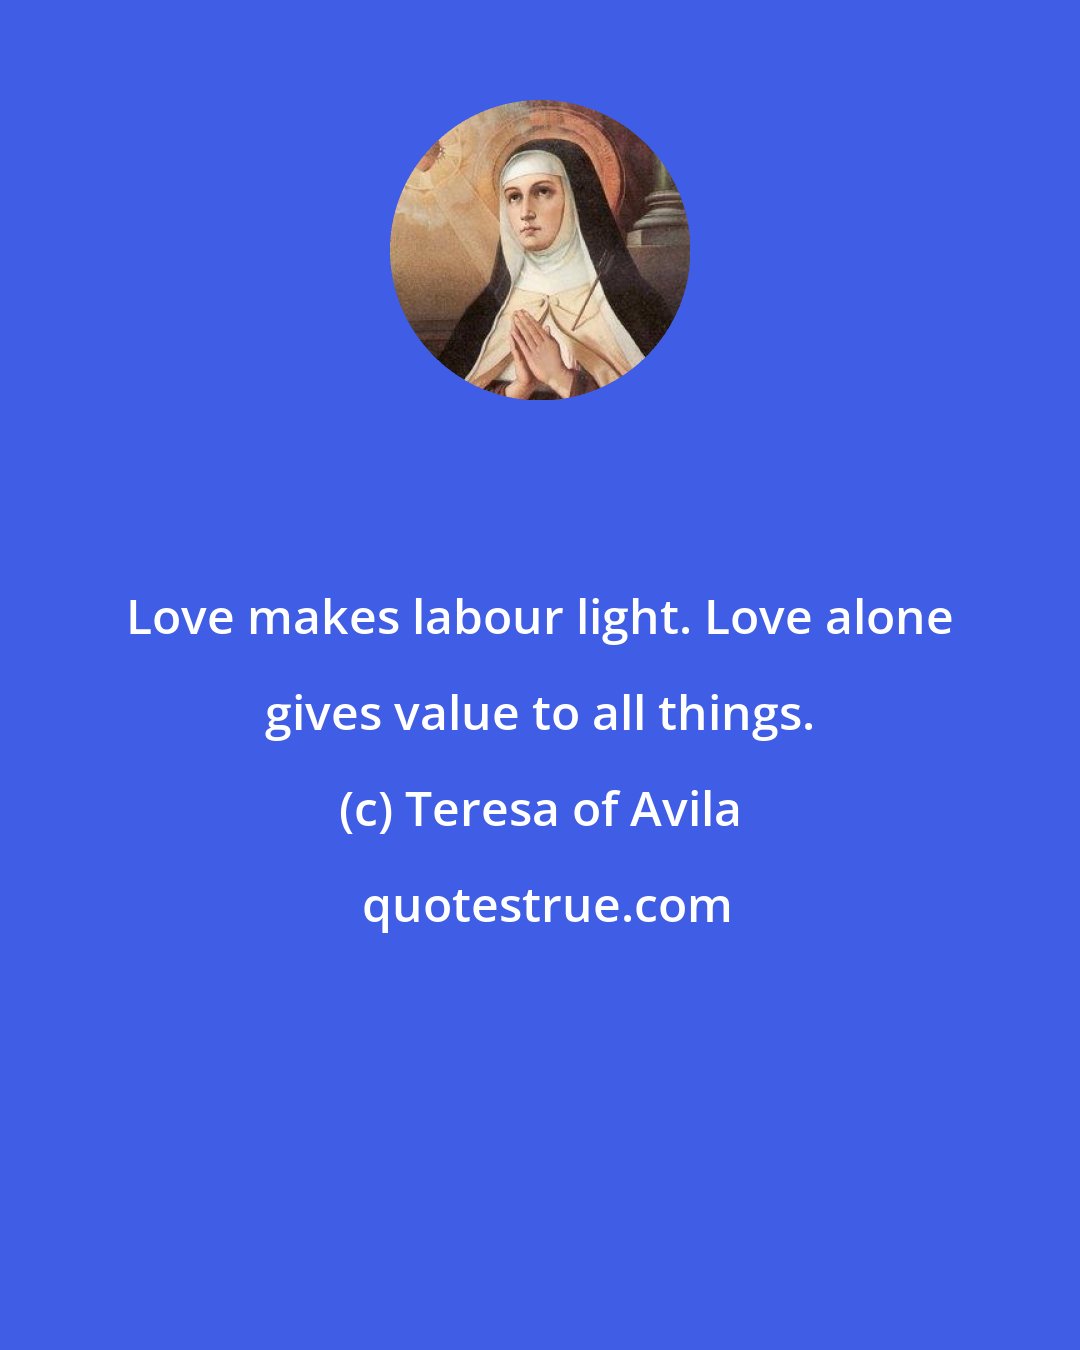 Teresa of Avila: Love makes labour light. Love alone gives value to all things.